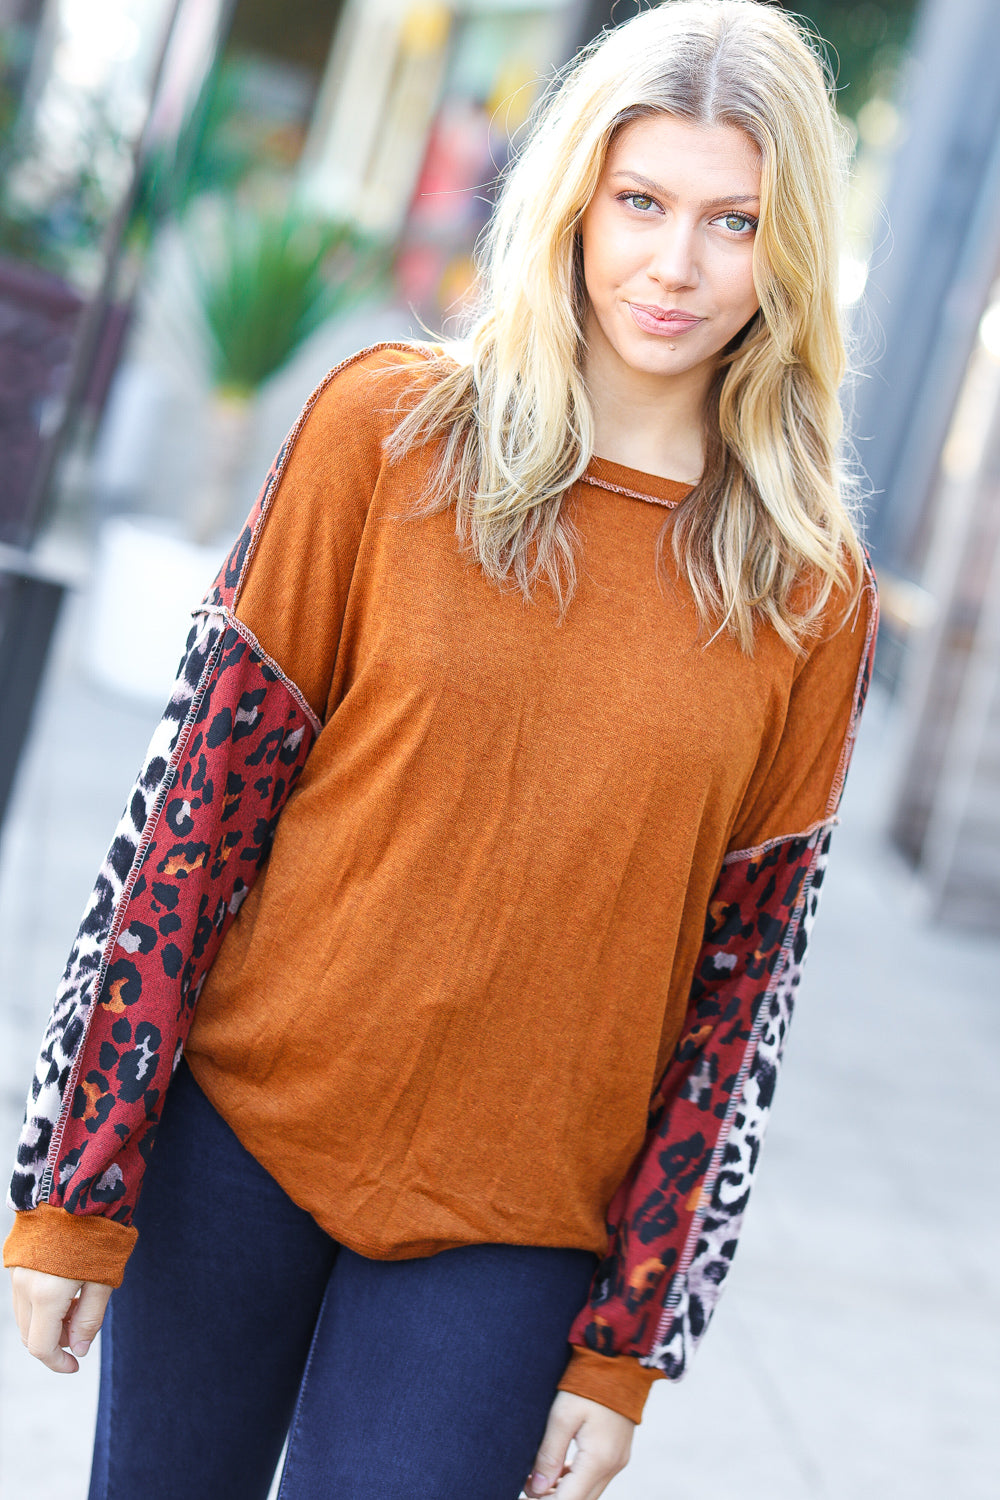 More Than Lovely Colorblock Leopard Knit Top